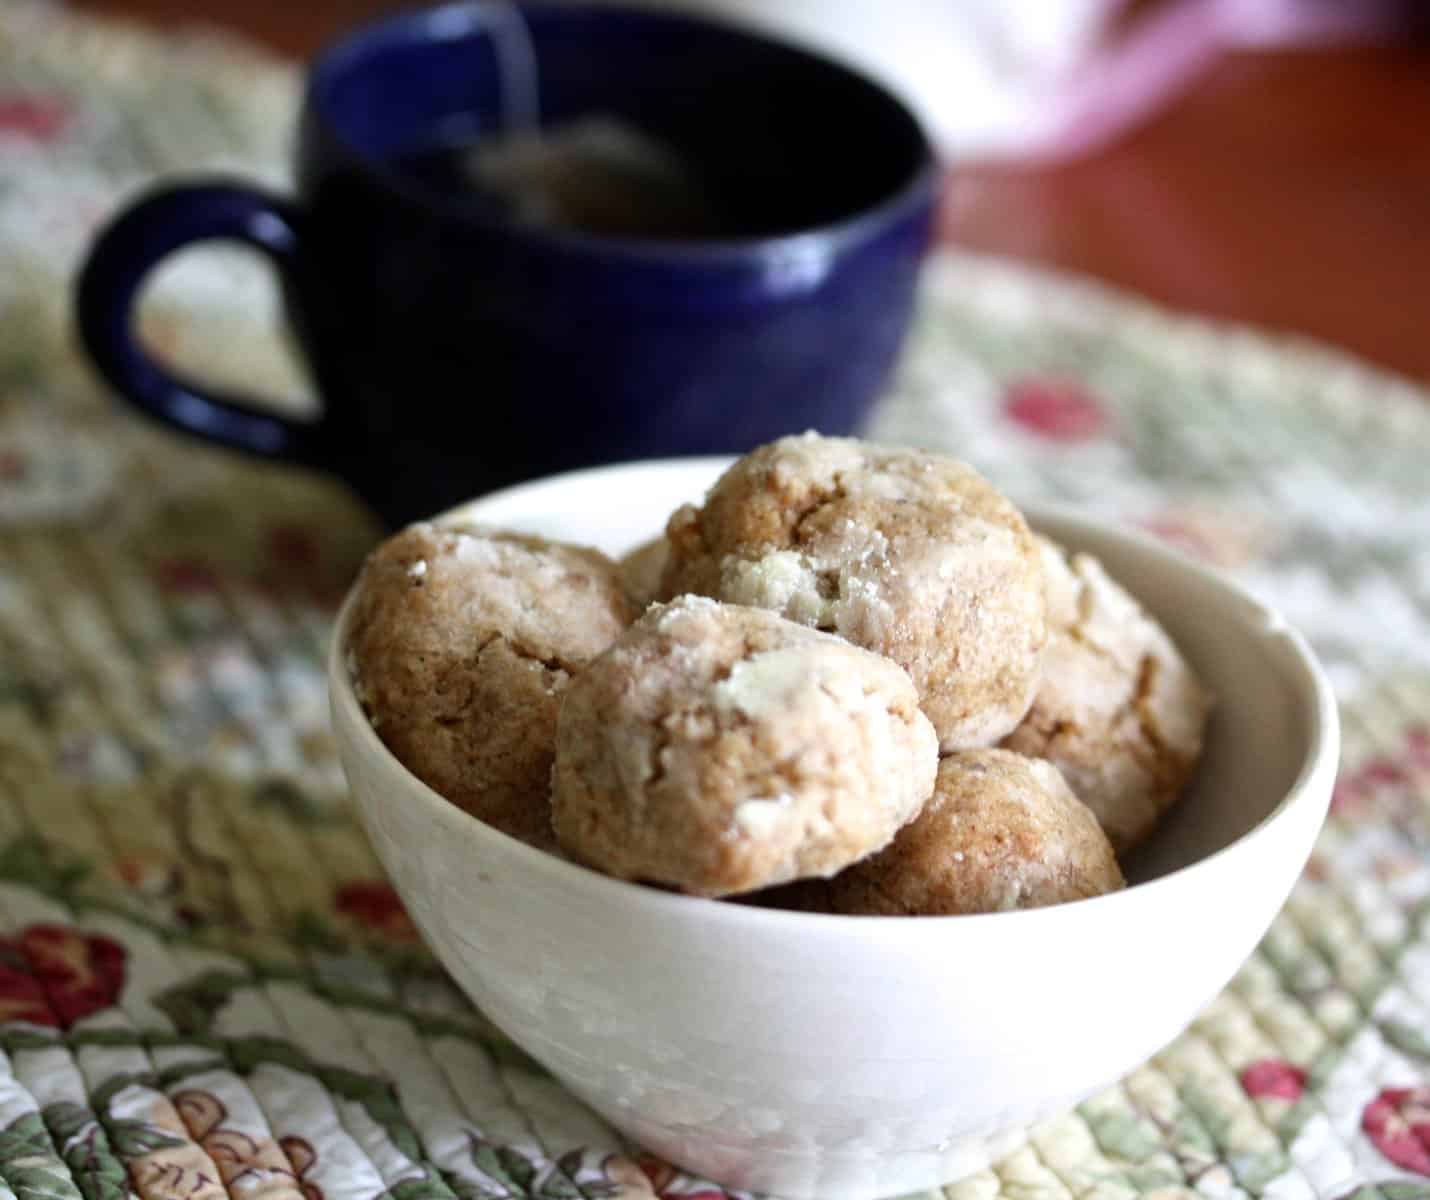 A bowl of cookies and tea.